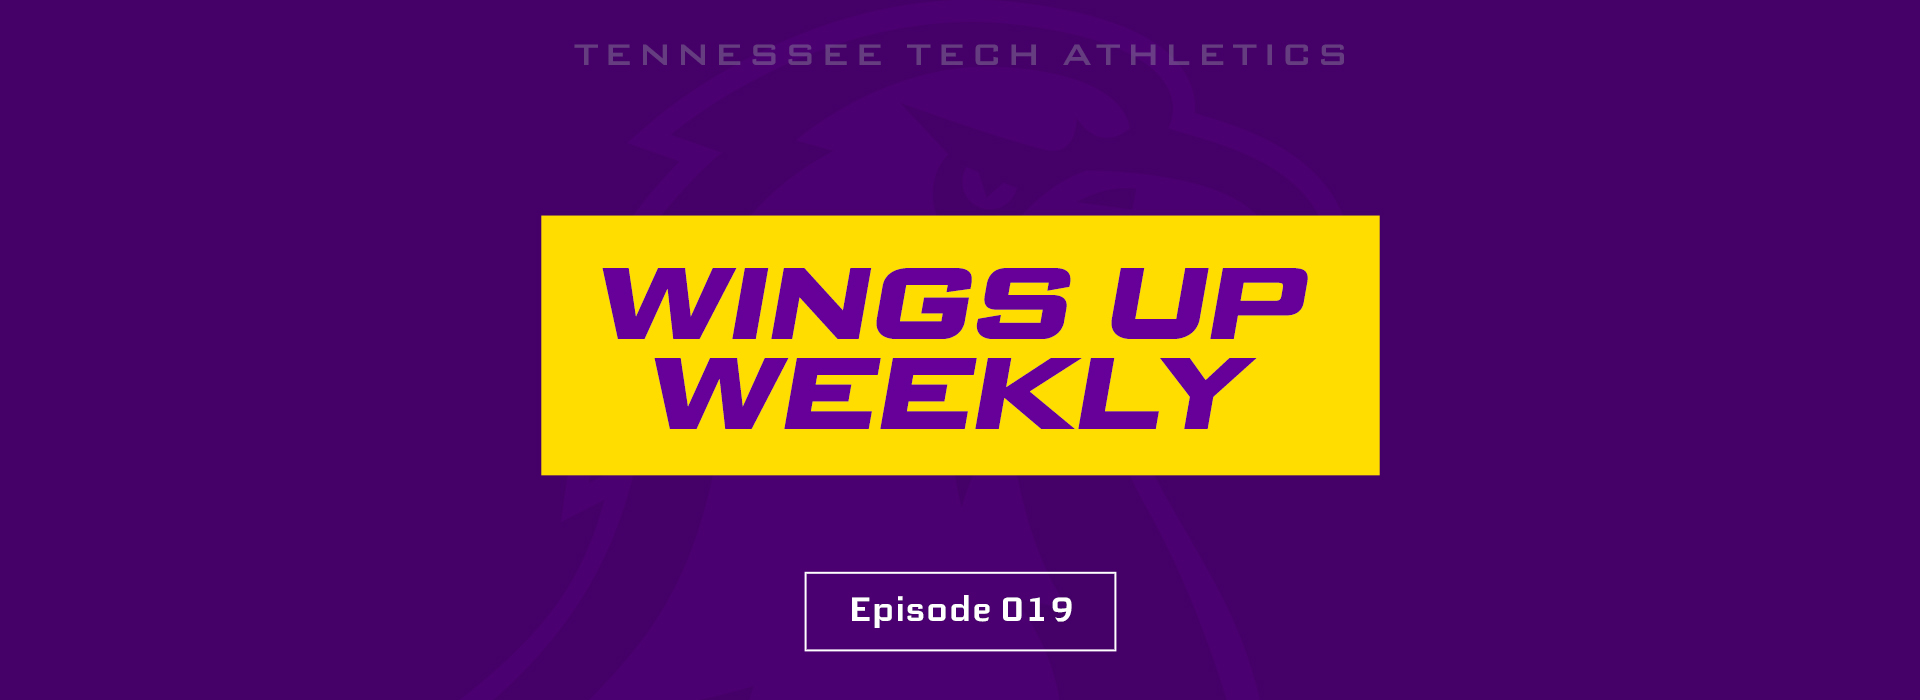 Wings Up Weekly: Episode 019 - featuring Tech head football coach Dewayne Alexander, juniors Bailey Fisher and David Gist